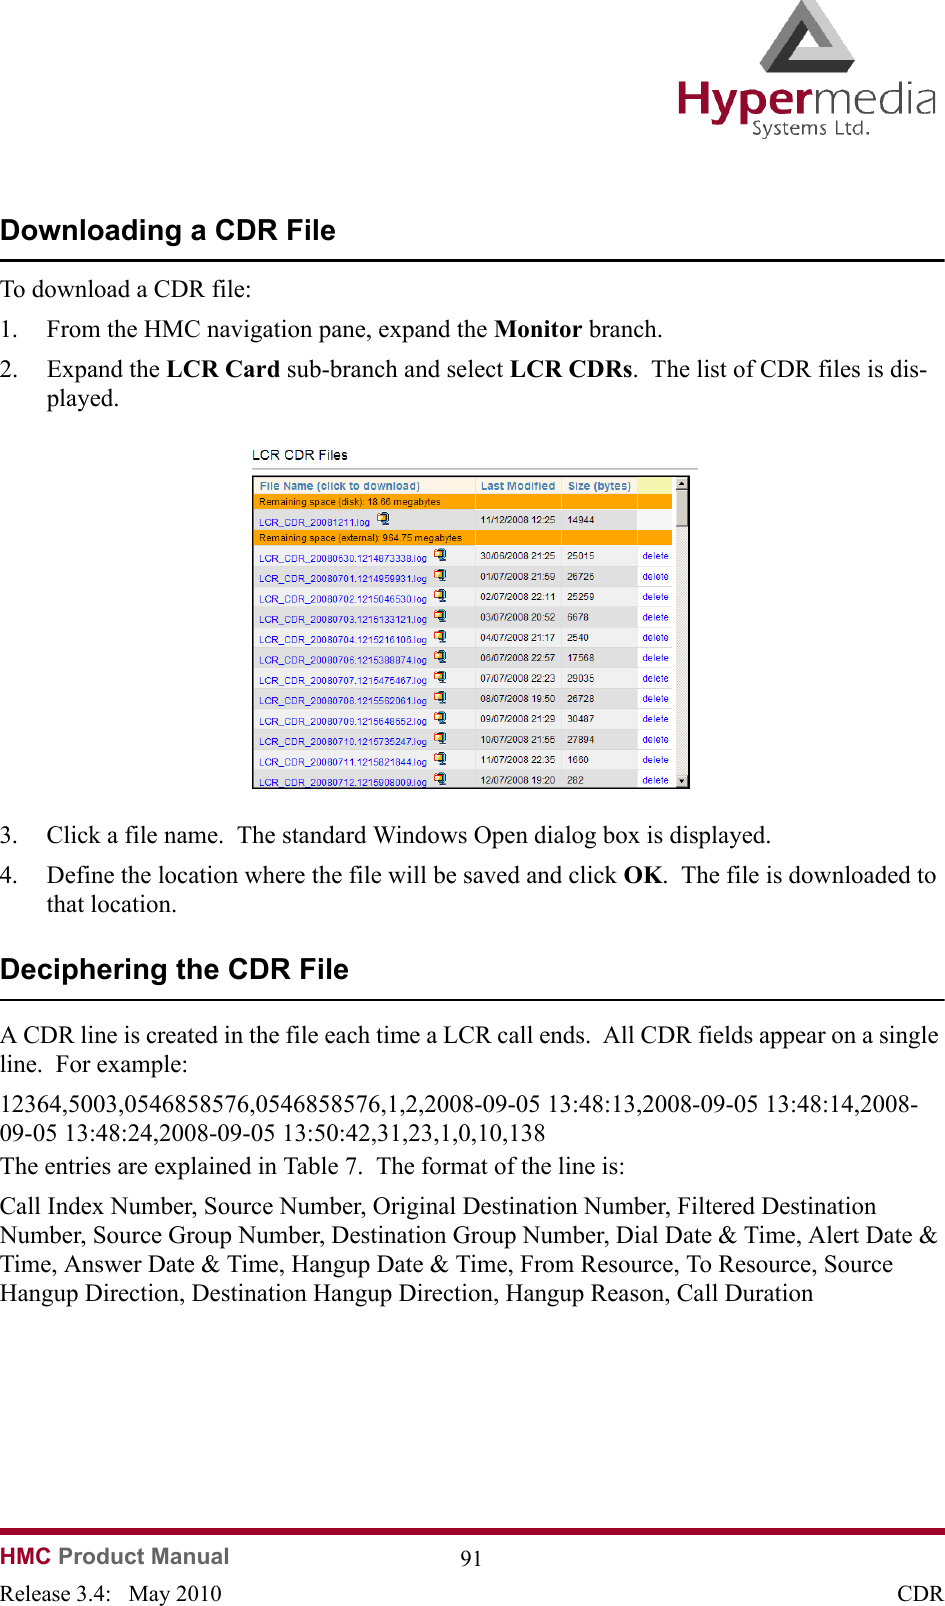 HMC Product Manual  91Release 3.4:   May 2010 CDRDownloading a CDR FileTo download a CDR file:1. From the HMC navigation pane, expand the Monitor branch.2. Expand the LCR Card sub-branch and select LCR CDRs.  The list of CDR files is dis-played.              3. Click a file name.  The standard Windows Open dialog box is displayed.4. Define the location where the file will be saved and click OK.  The file is downloaded to that location.Deciphering the CDR FileA CDR line is created in the file each time a LCR call ends.  All CDR fields appear on a single line.  For example:12364,5003,0546858576,0546858576,1,2,2008-09-05 13:48:13,2008-09-05 13:48:14,2008-09-05 13:48:24,2008-09-05 13:50:42,31,23,1,0,10,138The entries are explained in Table 7.  The format of the line is:Call Index Number, Source Number, Original Destination Number, Filtered Destination Number, Source Group Number, Destination Group Number, Dial Date &amp; Time, Alert Date &amp; Time, Answer Date &amp; Time, Hangup Date &amp; Time, From Resource, To Resource, Source Hangup Direction, Destination Hangup Direction, Hangup Reason, Call Duration